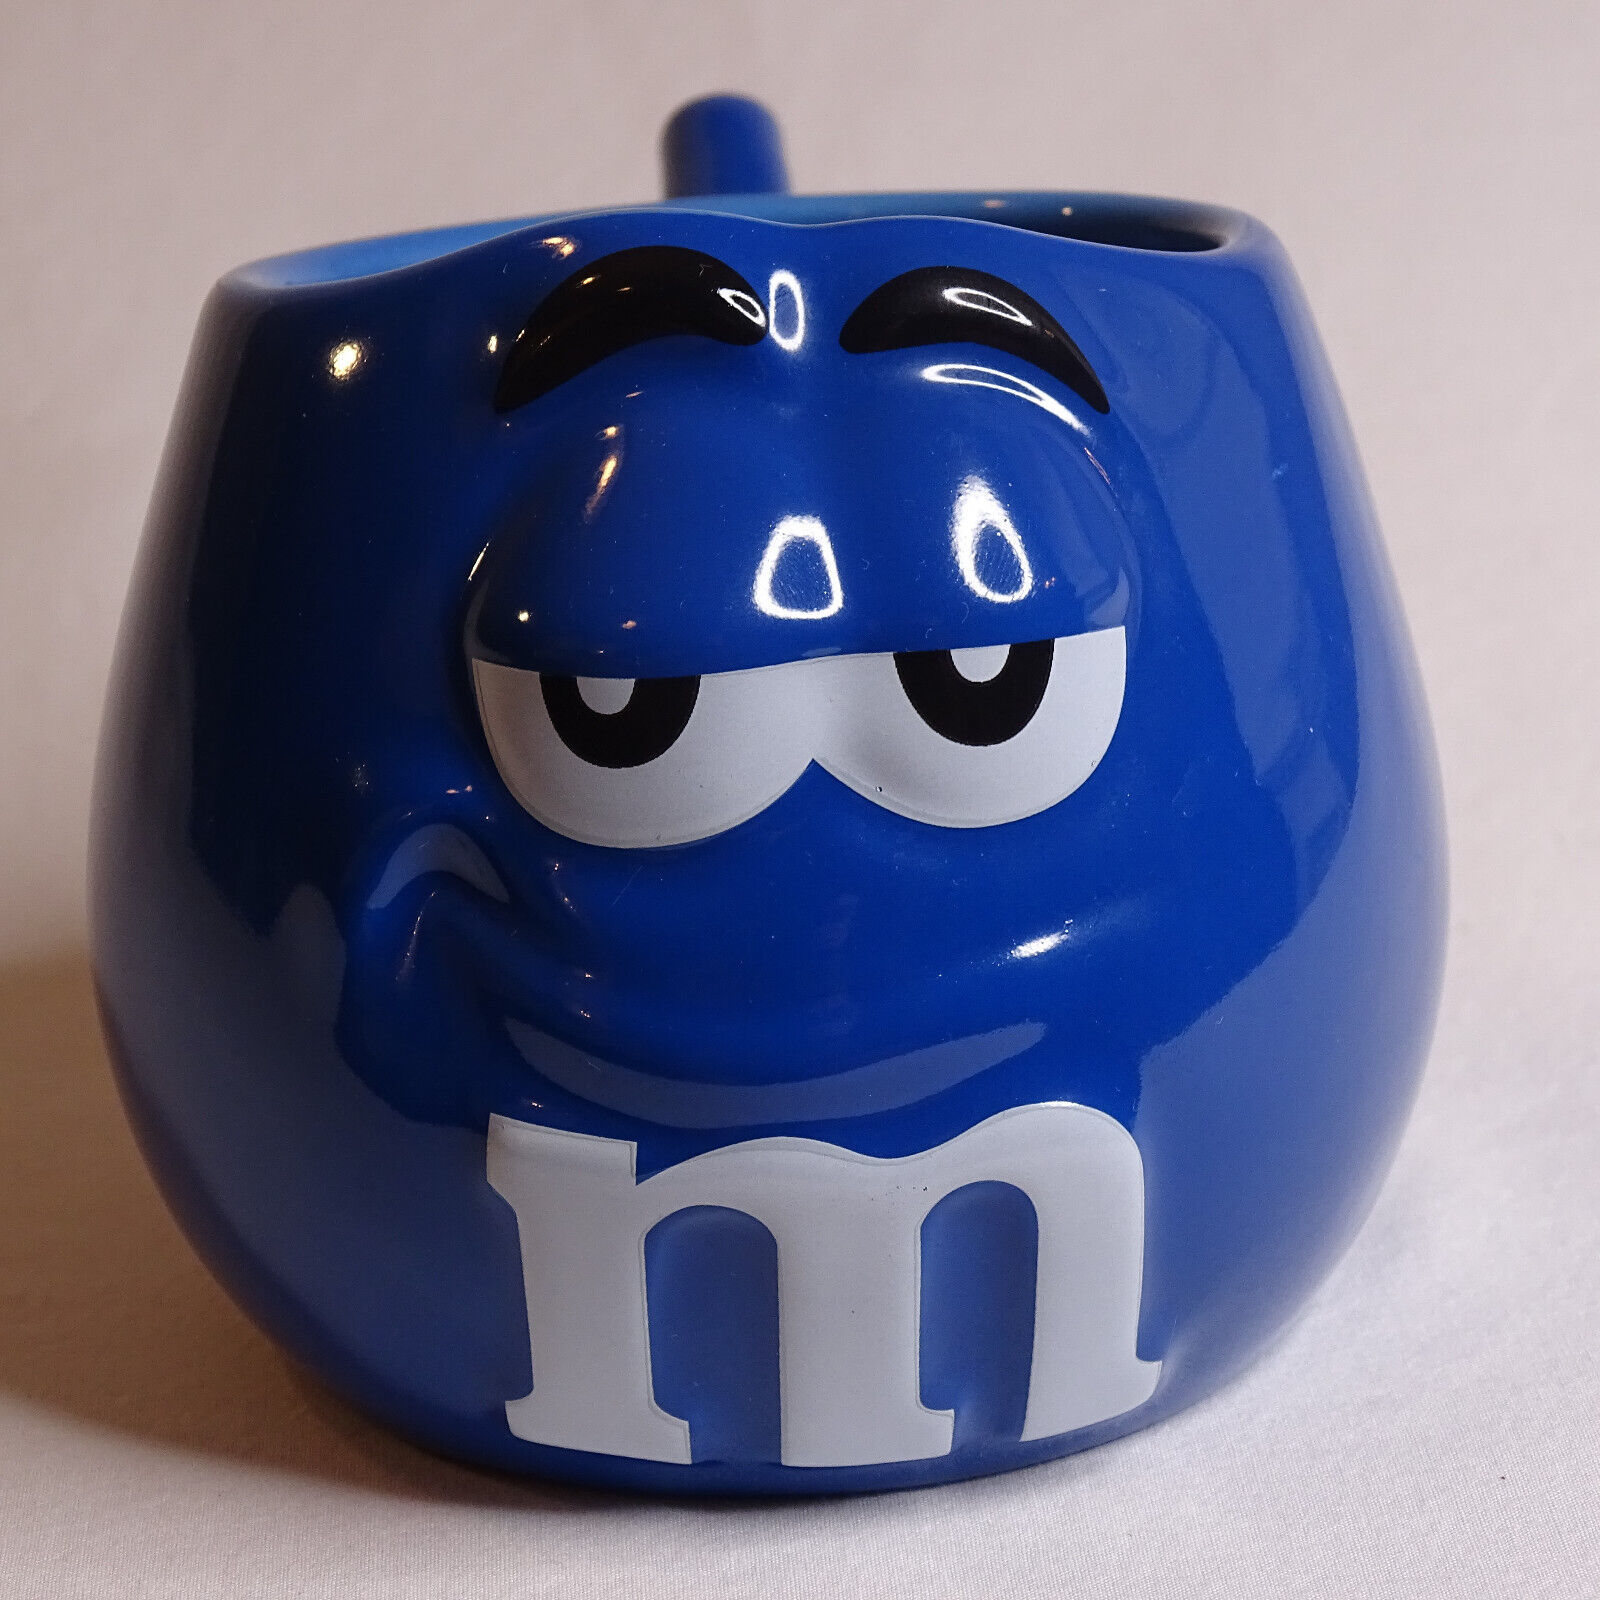 Primary image for Vintage M &M's World Blue 3D Mug 1997 16oz Candy Coffee Cup Mug Collectible Nuts